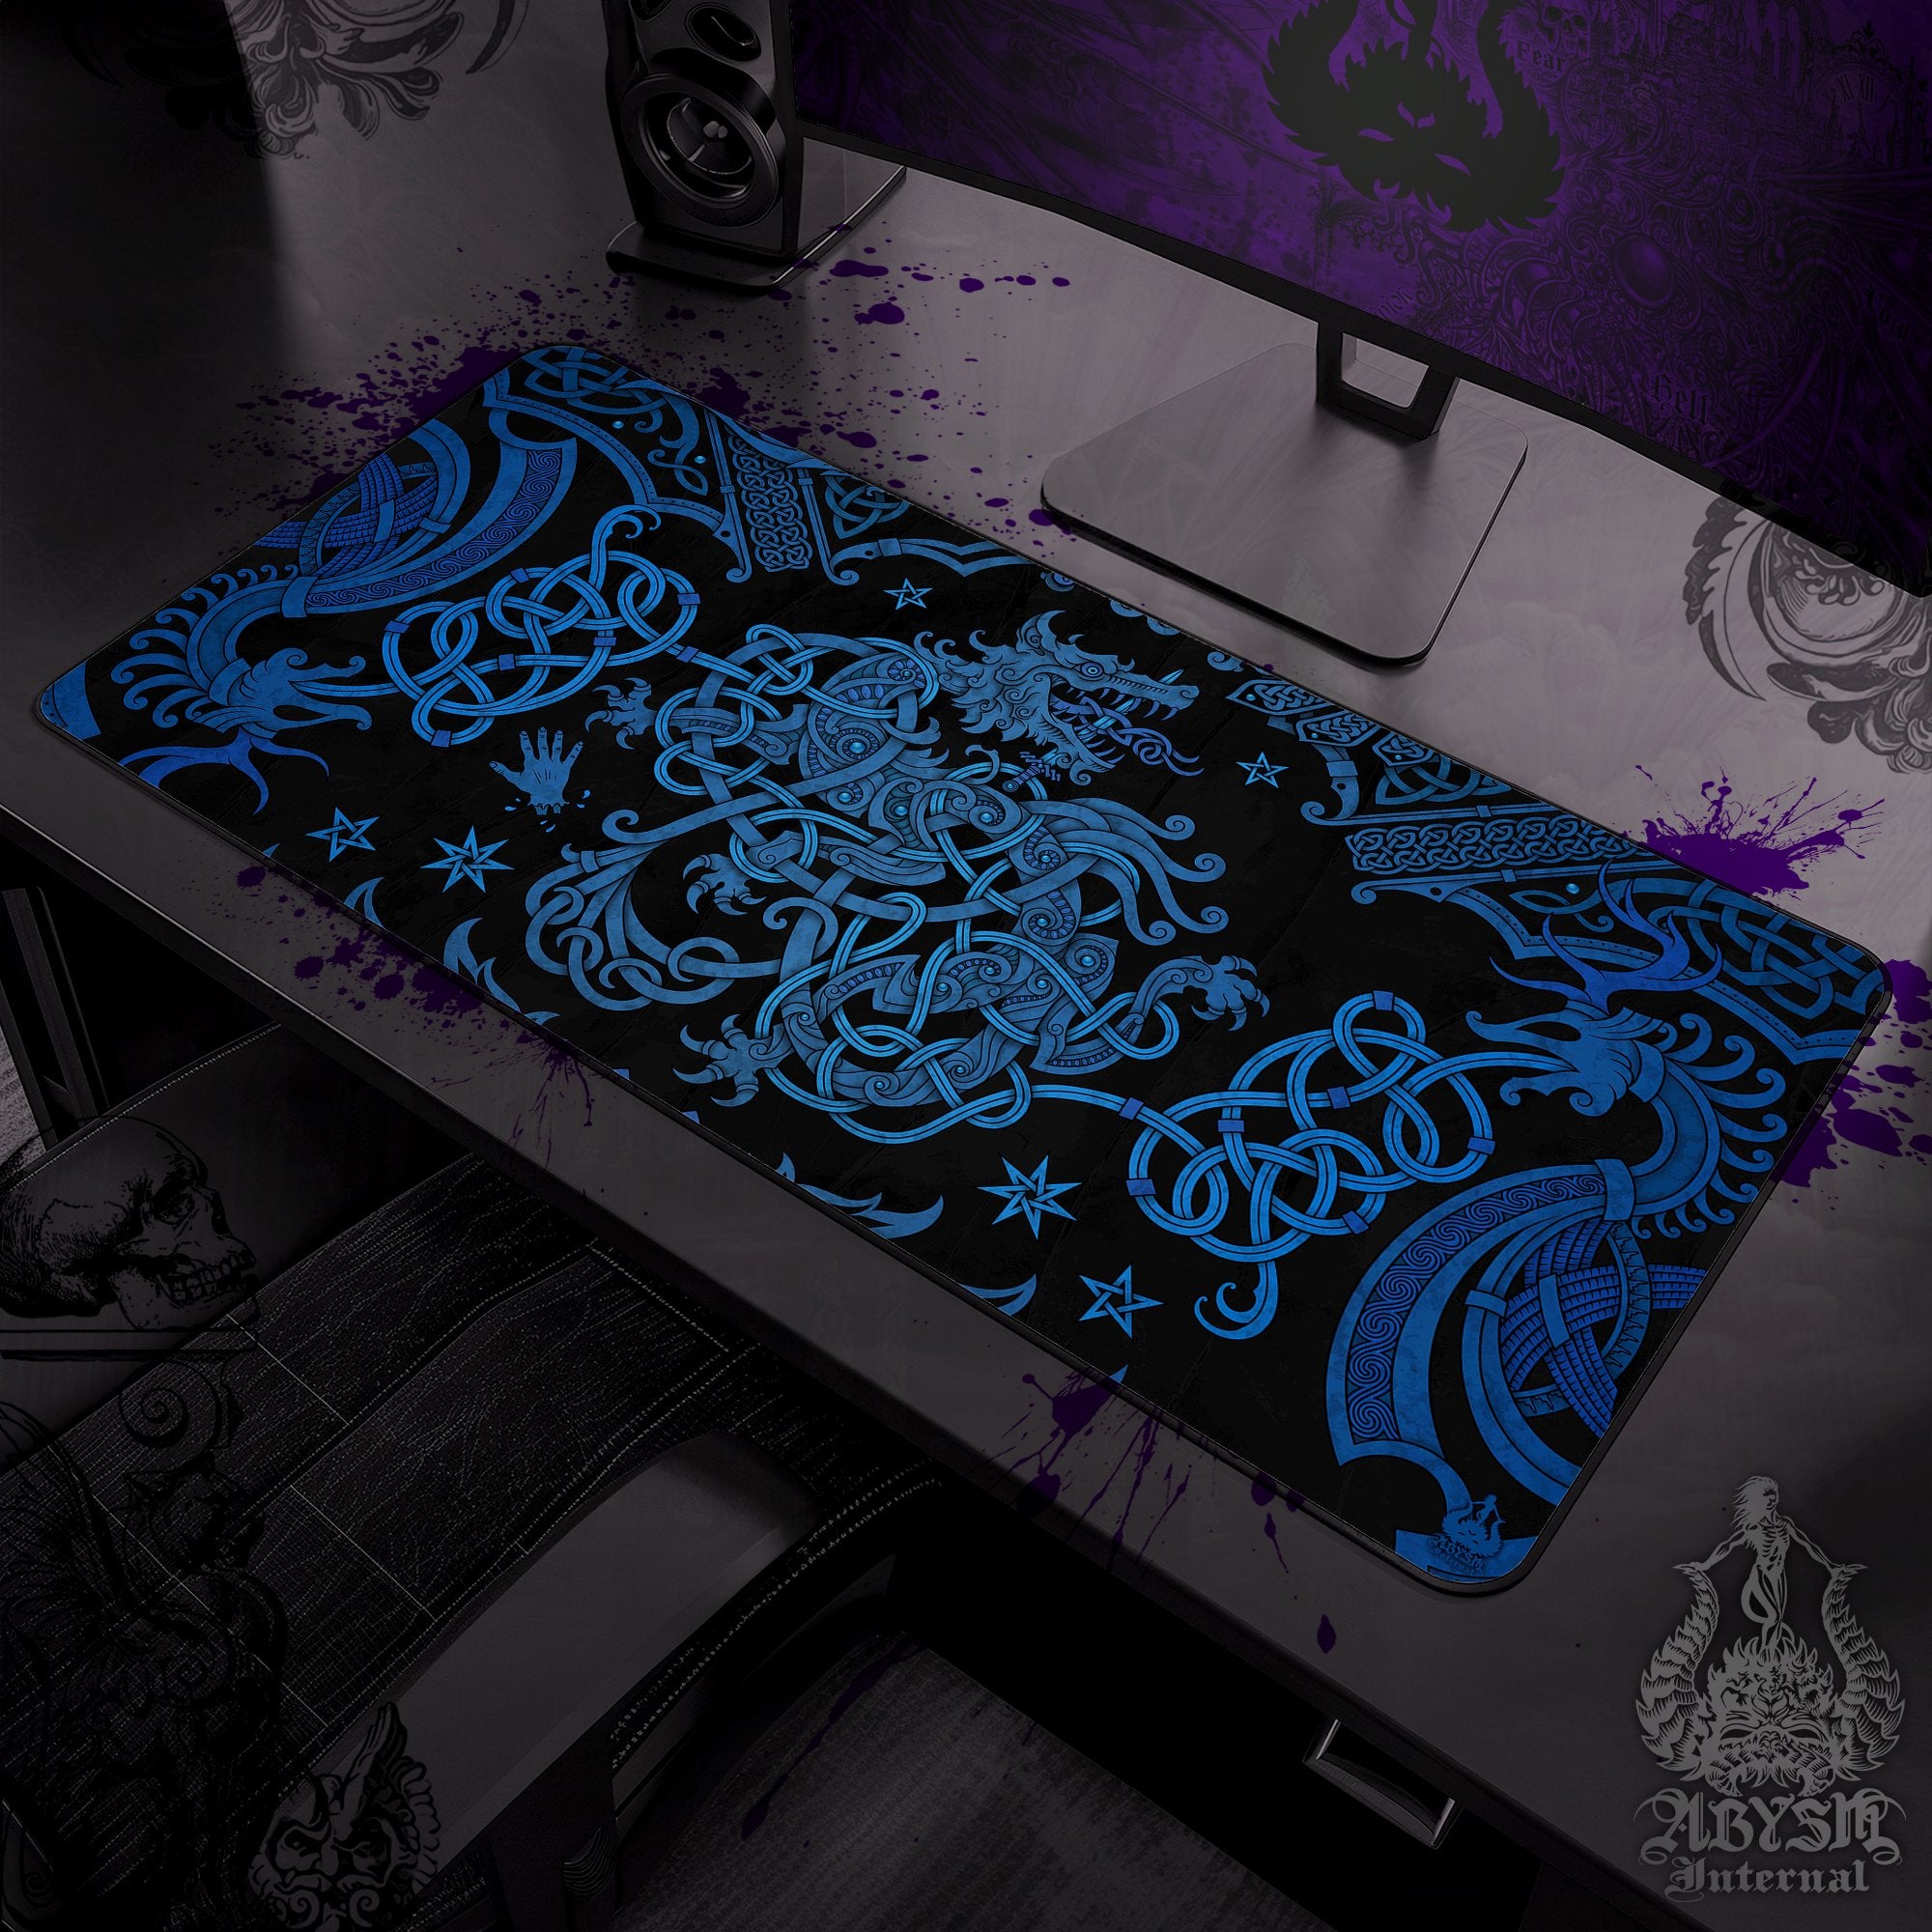 Fenrir Gaming Desk Mat, Viking Mouse Pad, Nordic Knotwork Table Protector Cover, Norse Wolf Workpad, Art Print - Black Blue - Abysm Internal